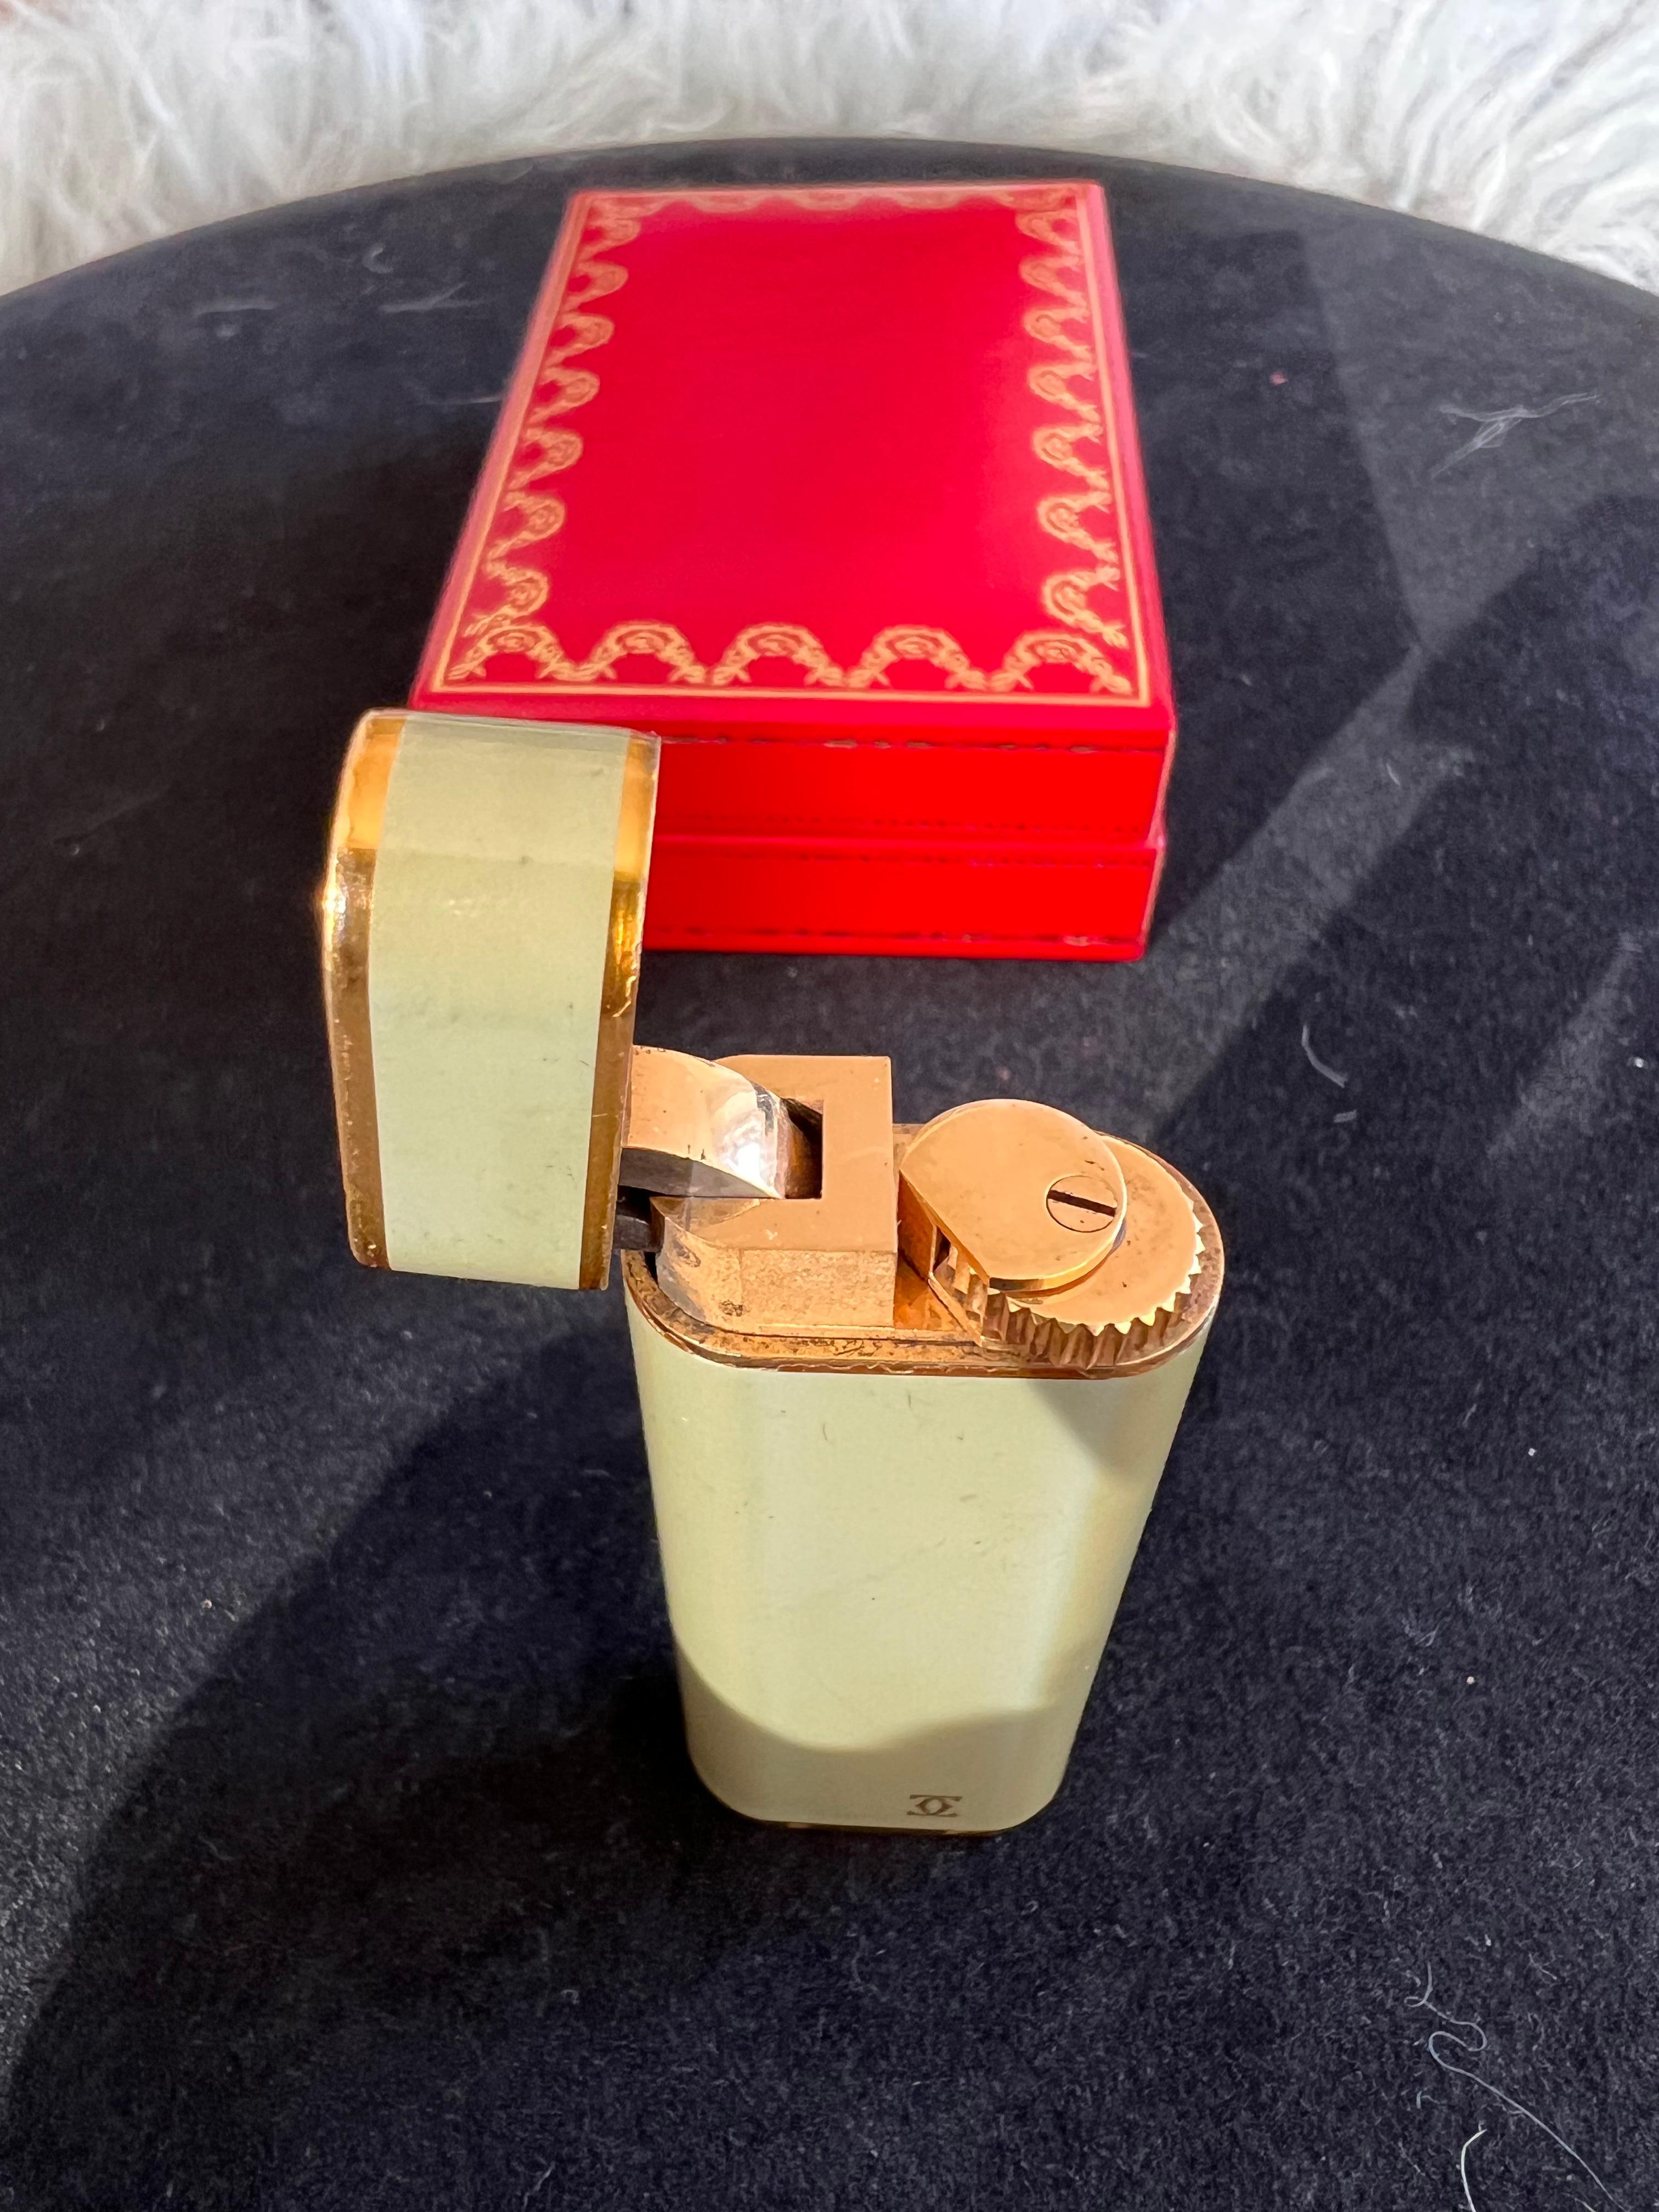 Vintage and Retro - A Les Must De Cartier Paris 18k gold plated lighter
Cartier lighter from the enamel line high end rare size
Gold plated and Olive Chinese lacquer, signed and numbered on the base.
complete of original box and warranty.
This